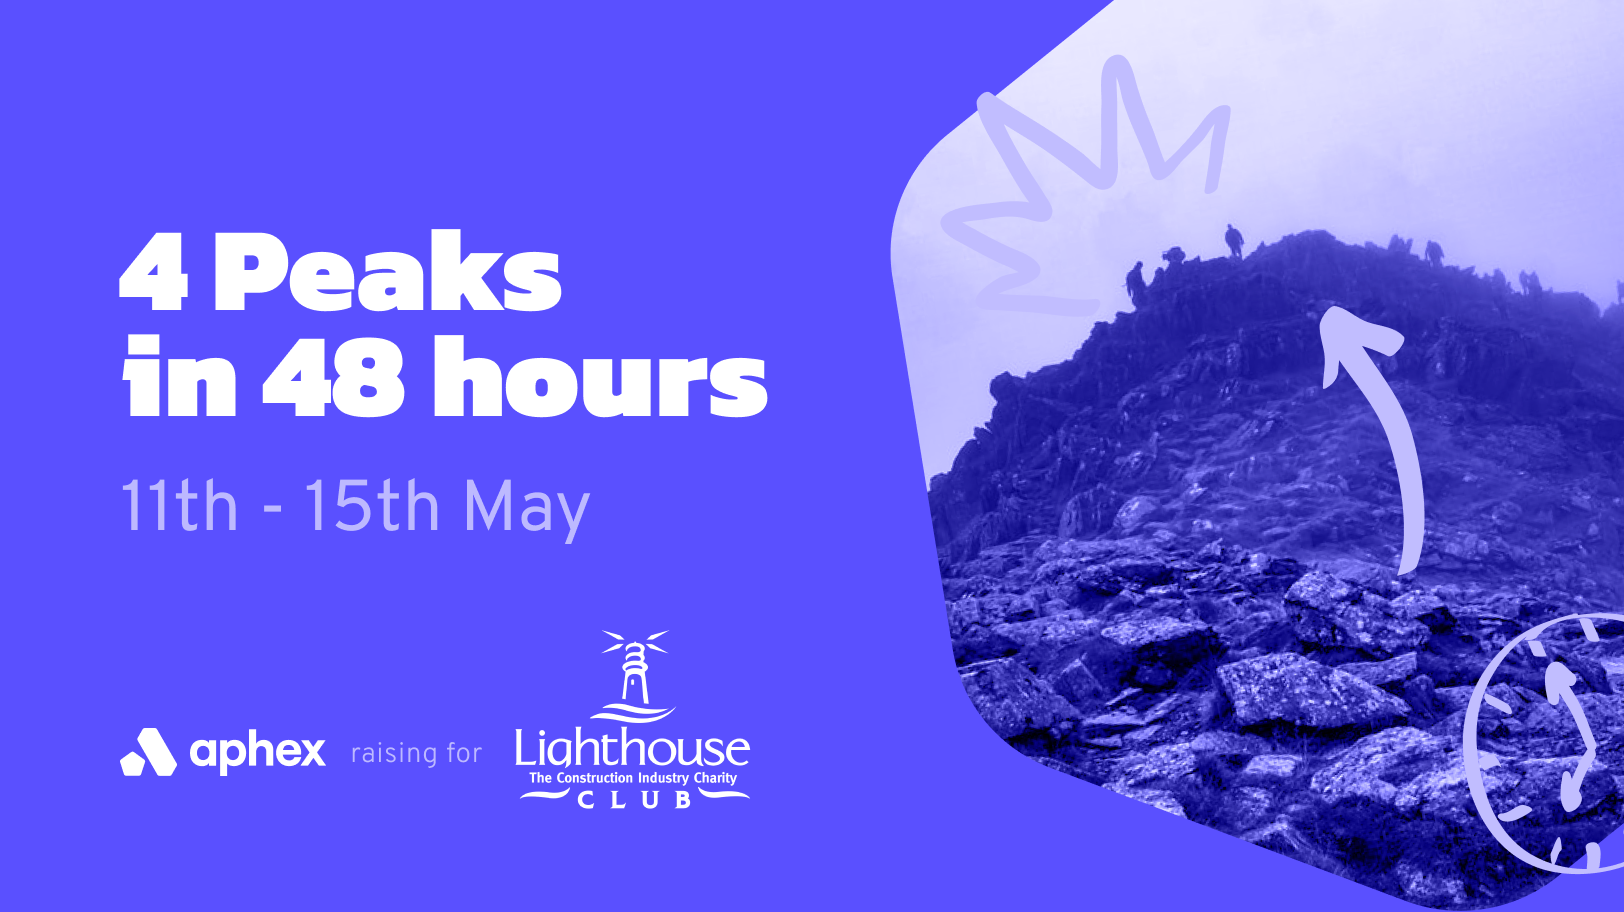 Aphex takes on the 4 peaks challenge to raise money for Lighthouse Construction Industry Charity